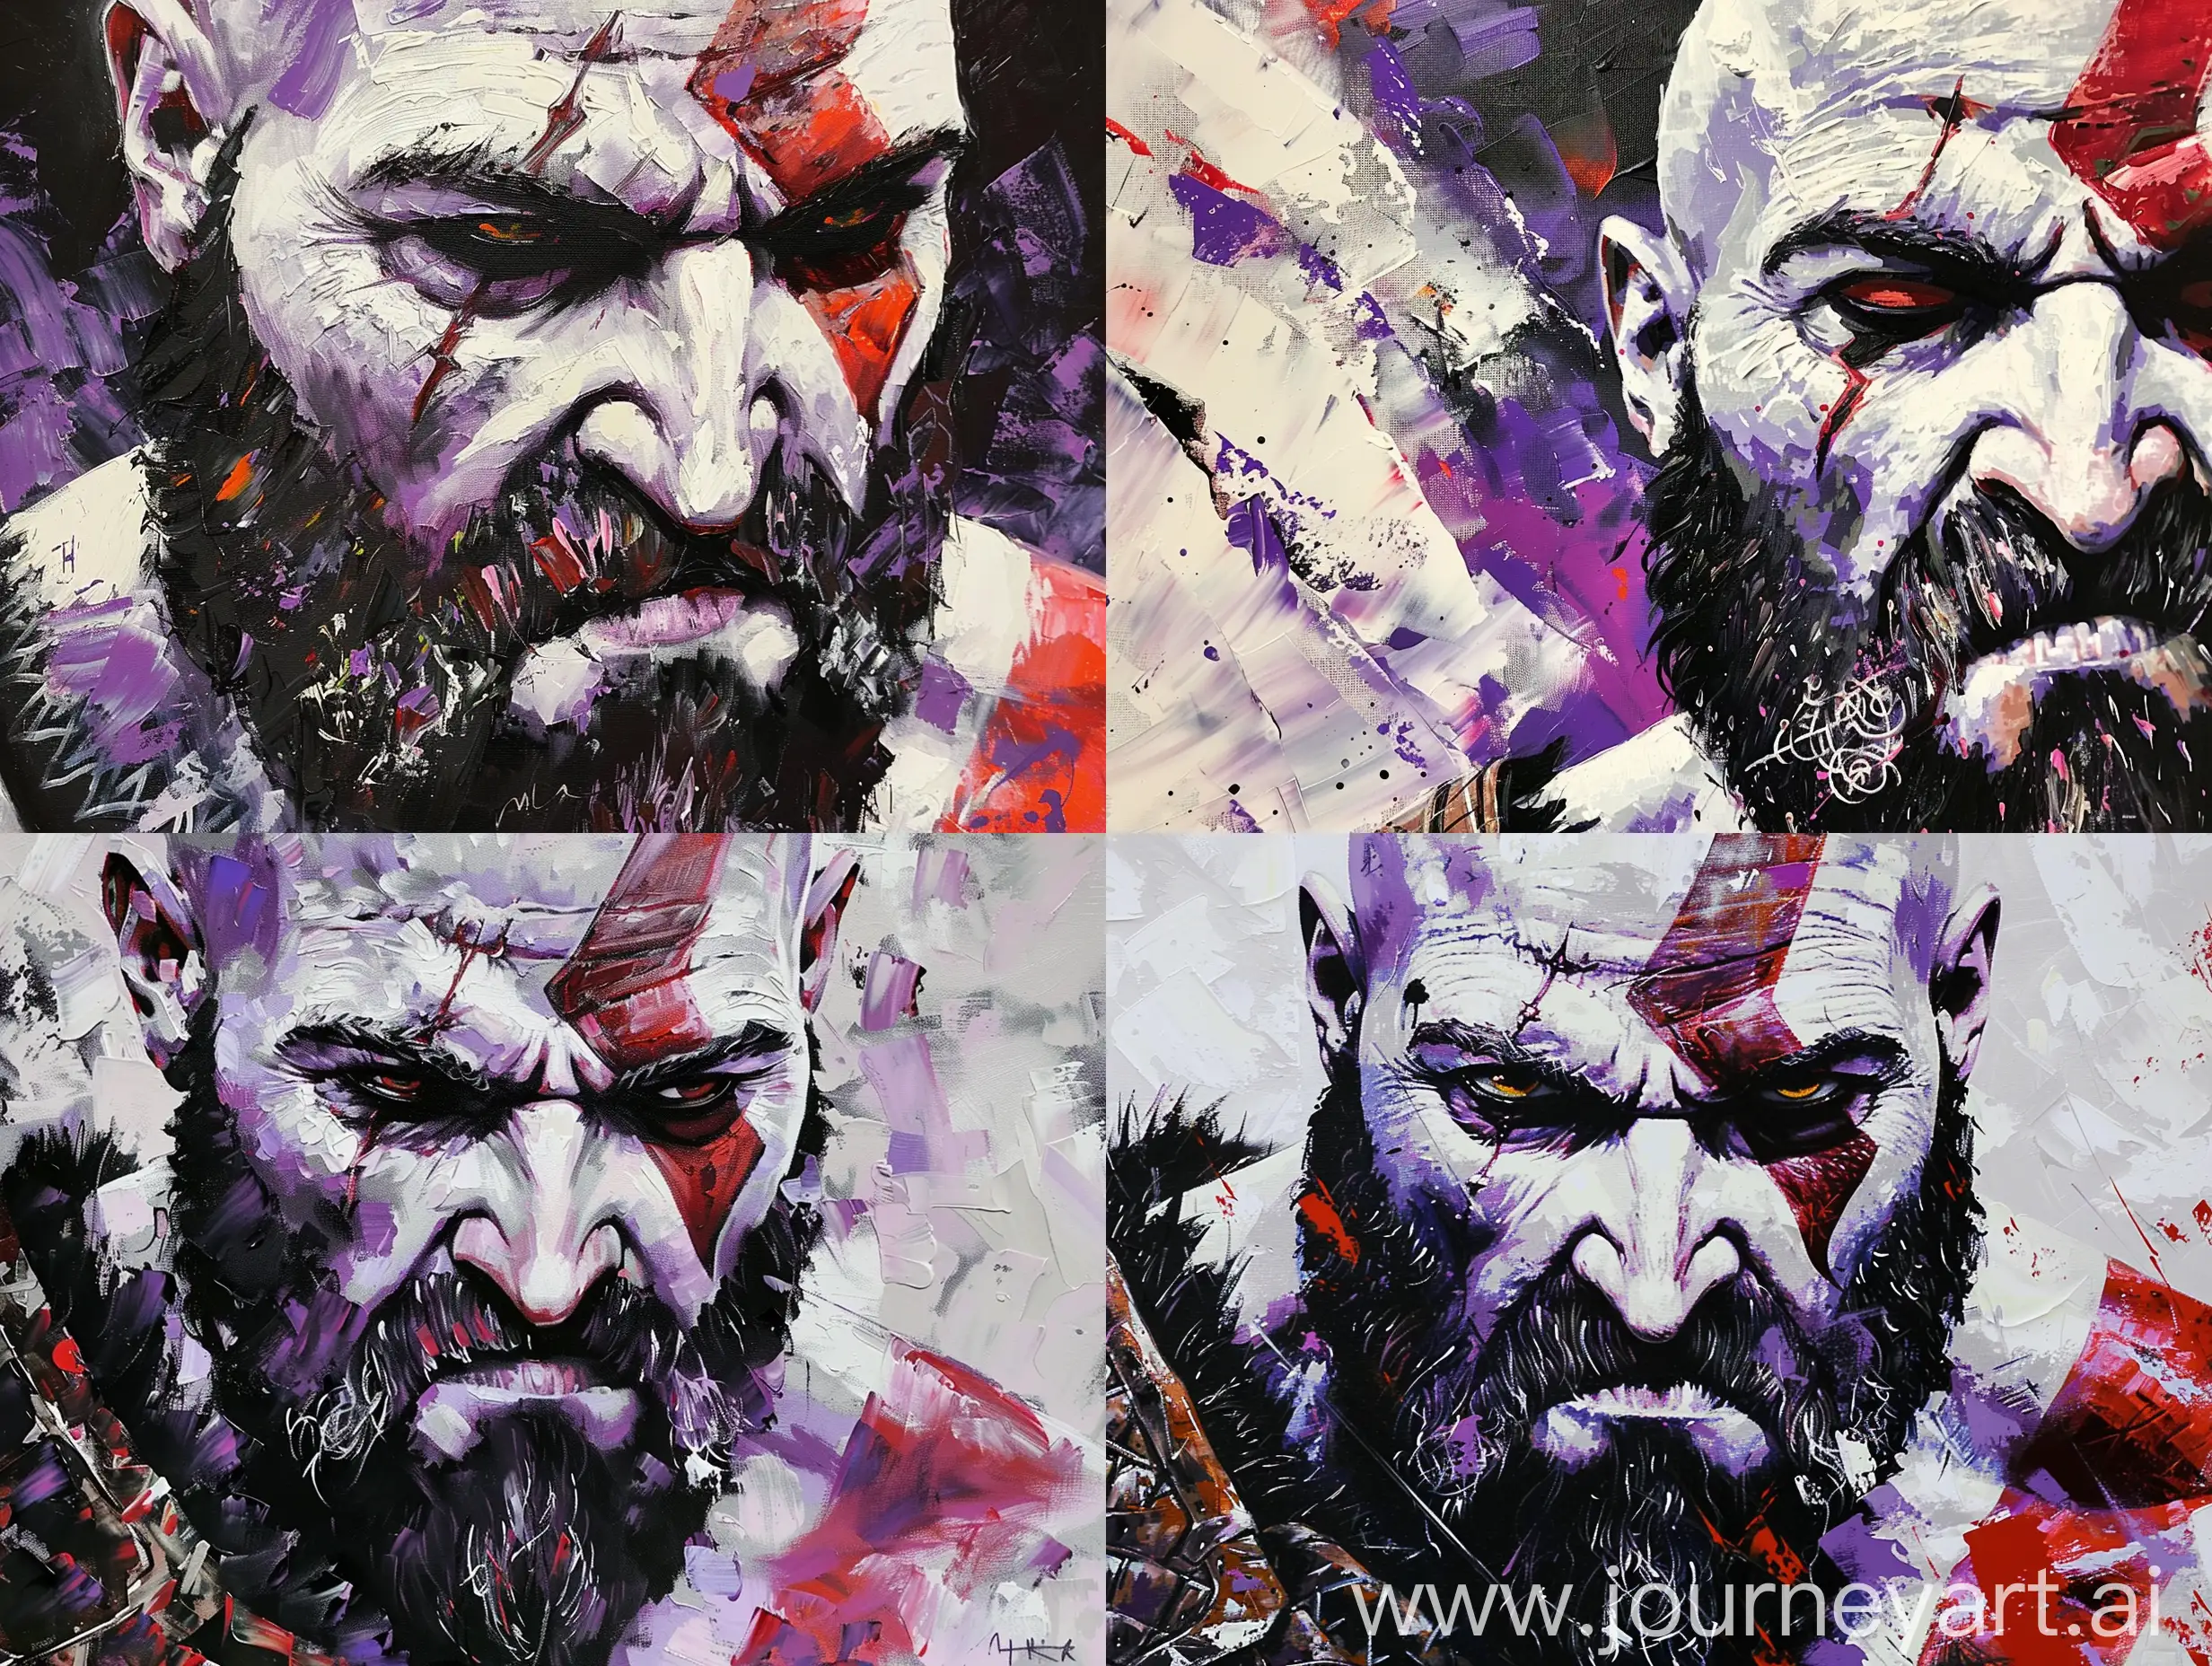 oil painting of kratos of god of war in star wars style with pastel color palette of purple, white, black, red. There are also touches of bright skin tone in high details
--c 3